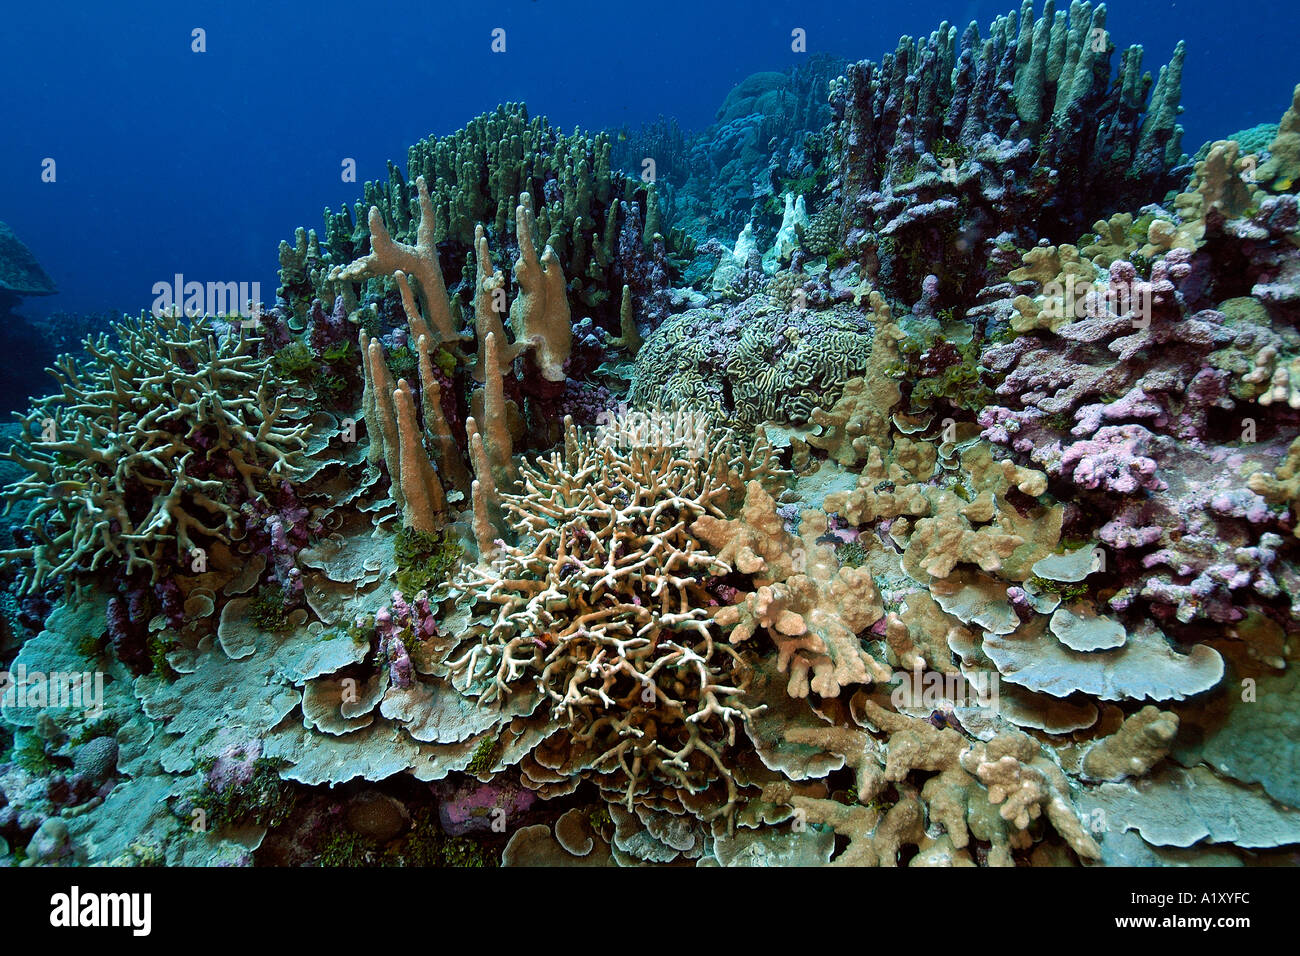 Highly diverse coral reef Namu atoll Marshall Islands N Pacific Stock Photo